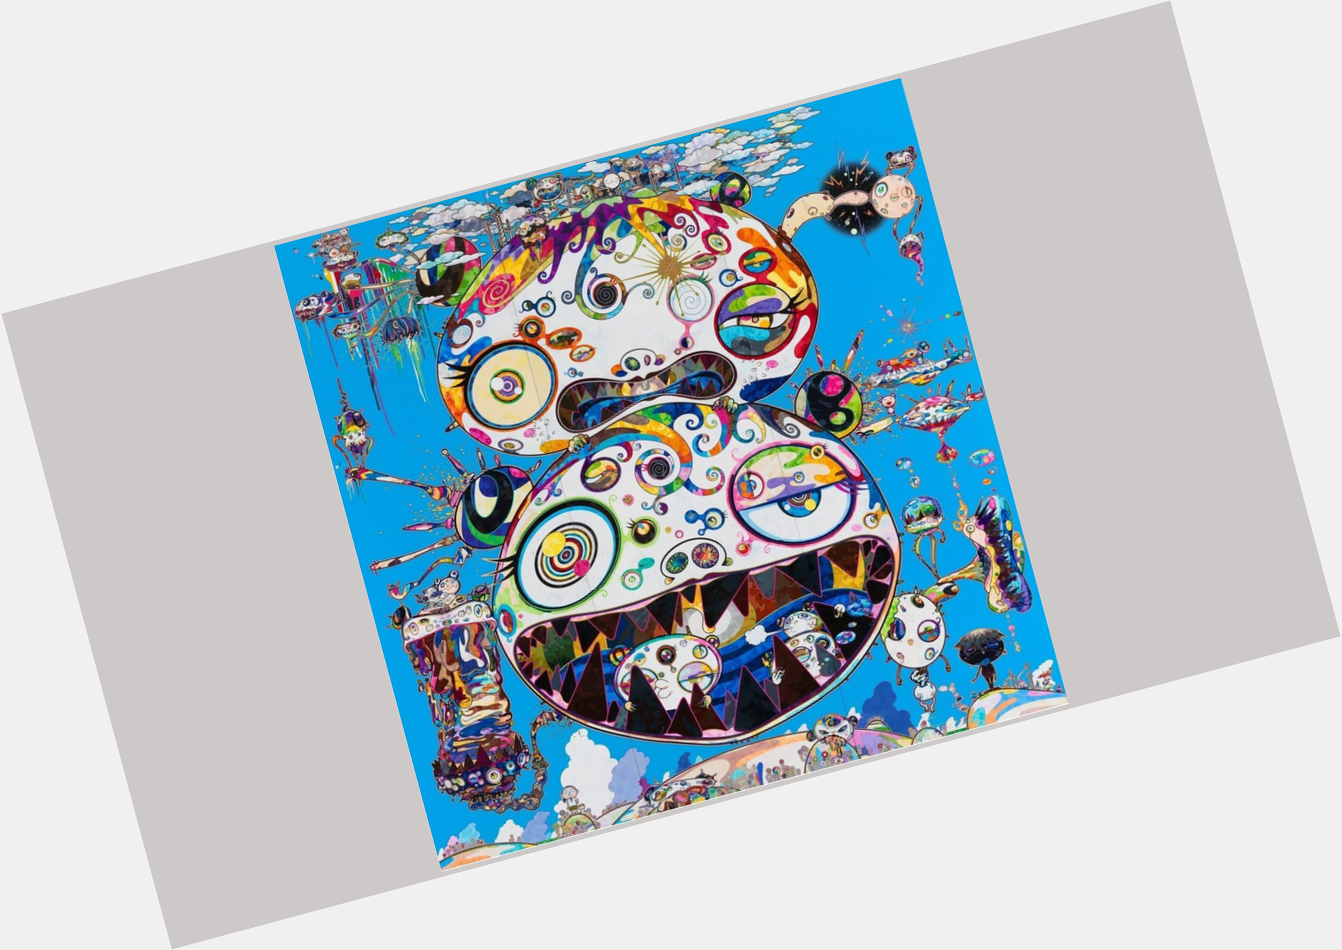 Happy birthday to the one and only, Takashi Murakami. Keep on inspiring! 